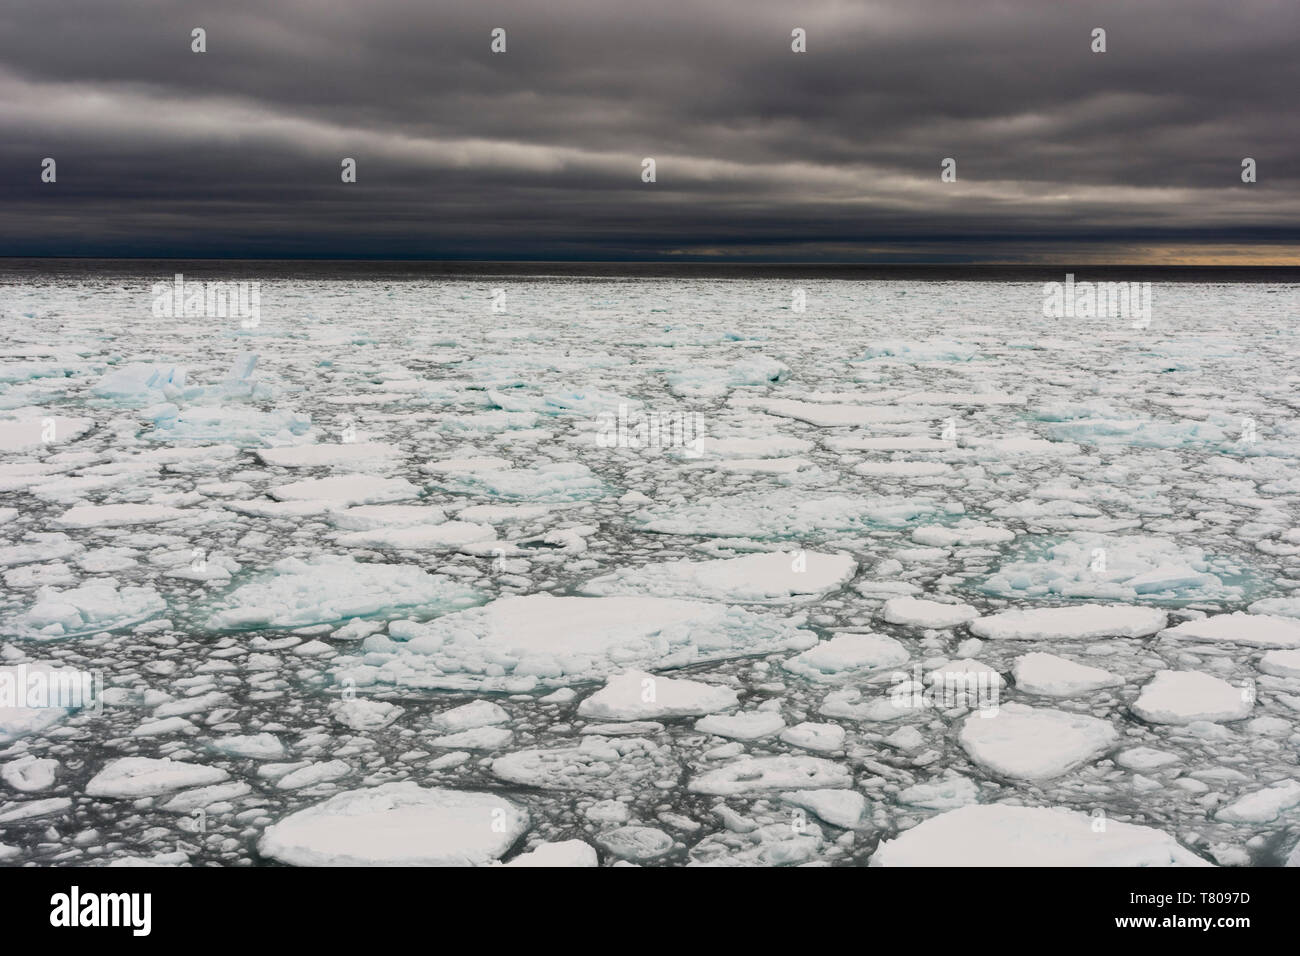 A view of the melting sea ice on the Arctic Ocean at 81 degrees, north of the Svalbard islands, Arctic, Norway, Europe Stock Photo